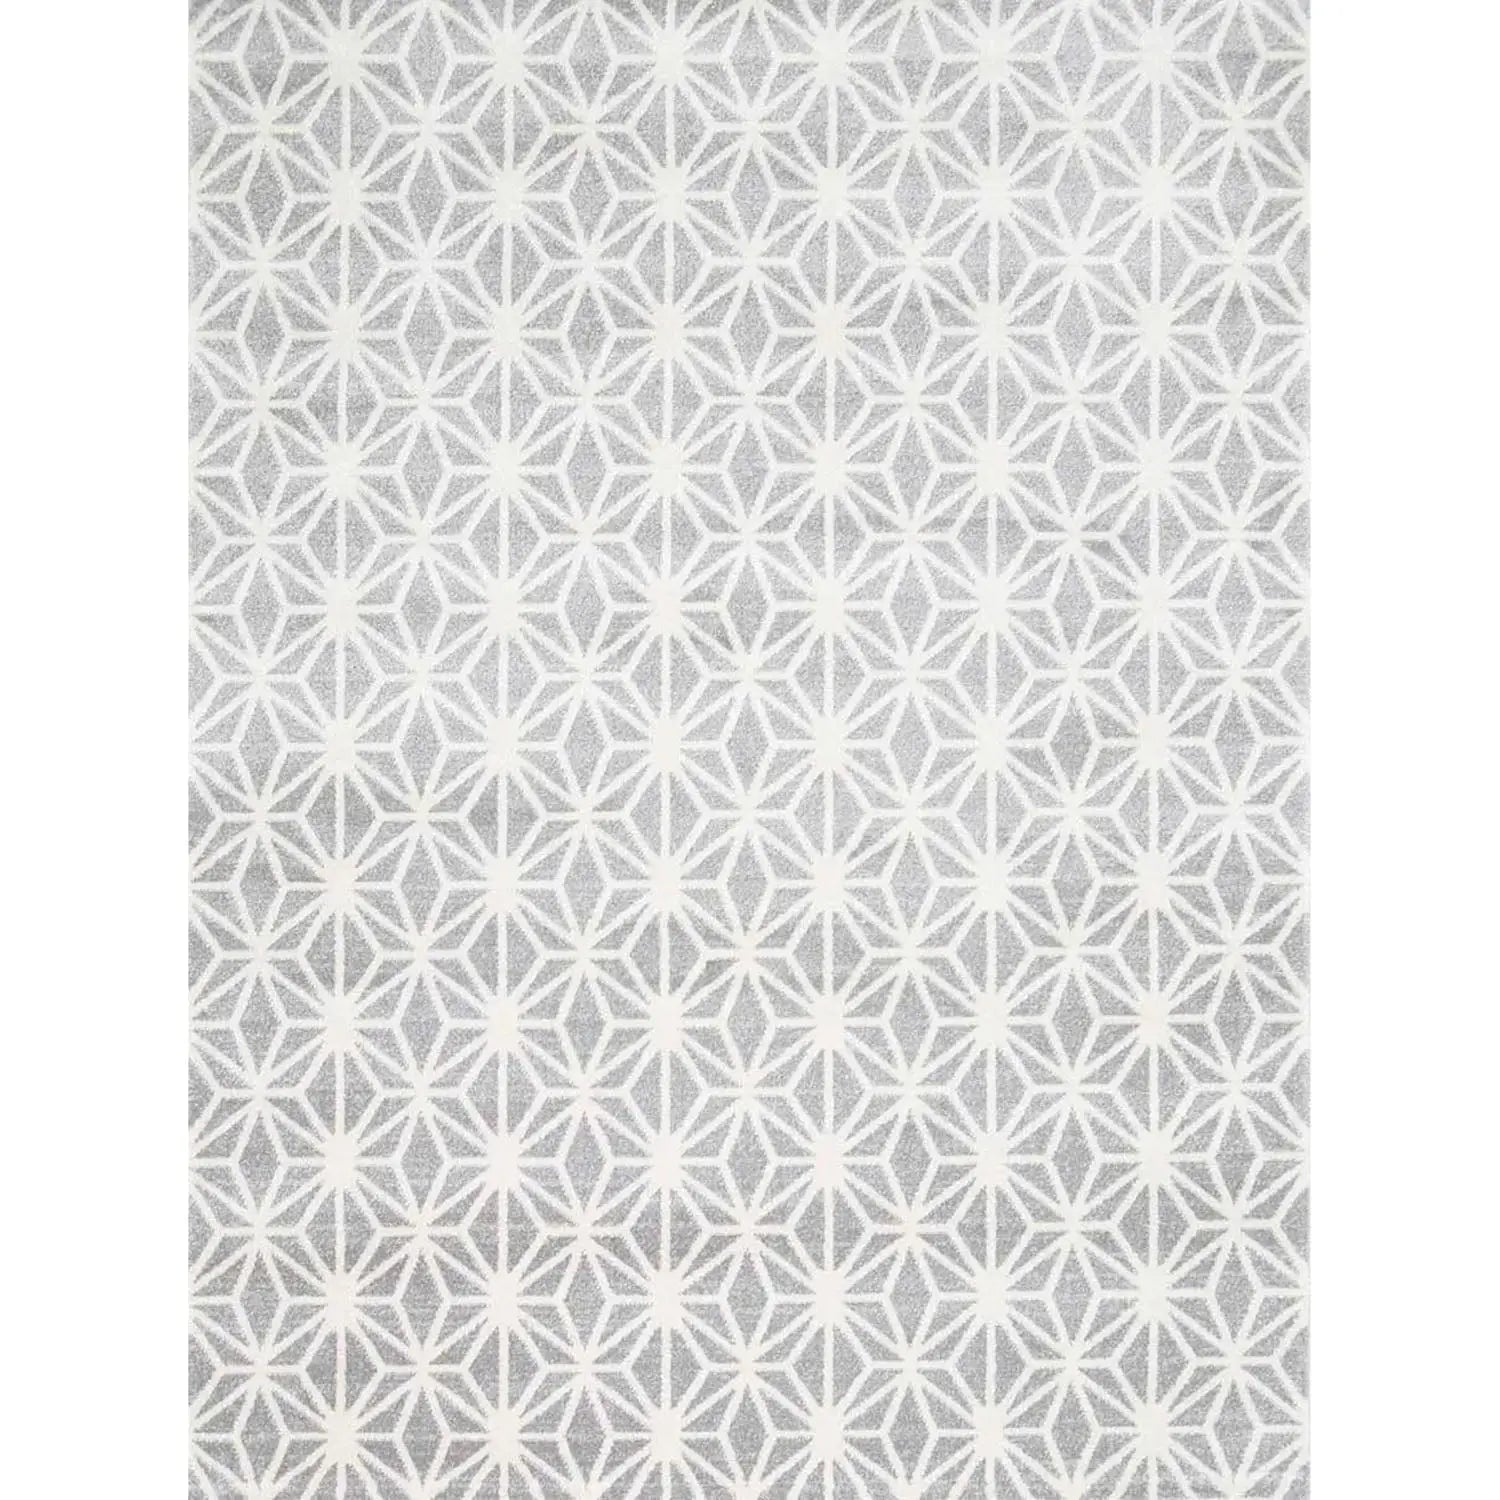 Matisse White Patterned Rug - Rugs - Rugs a Million